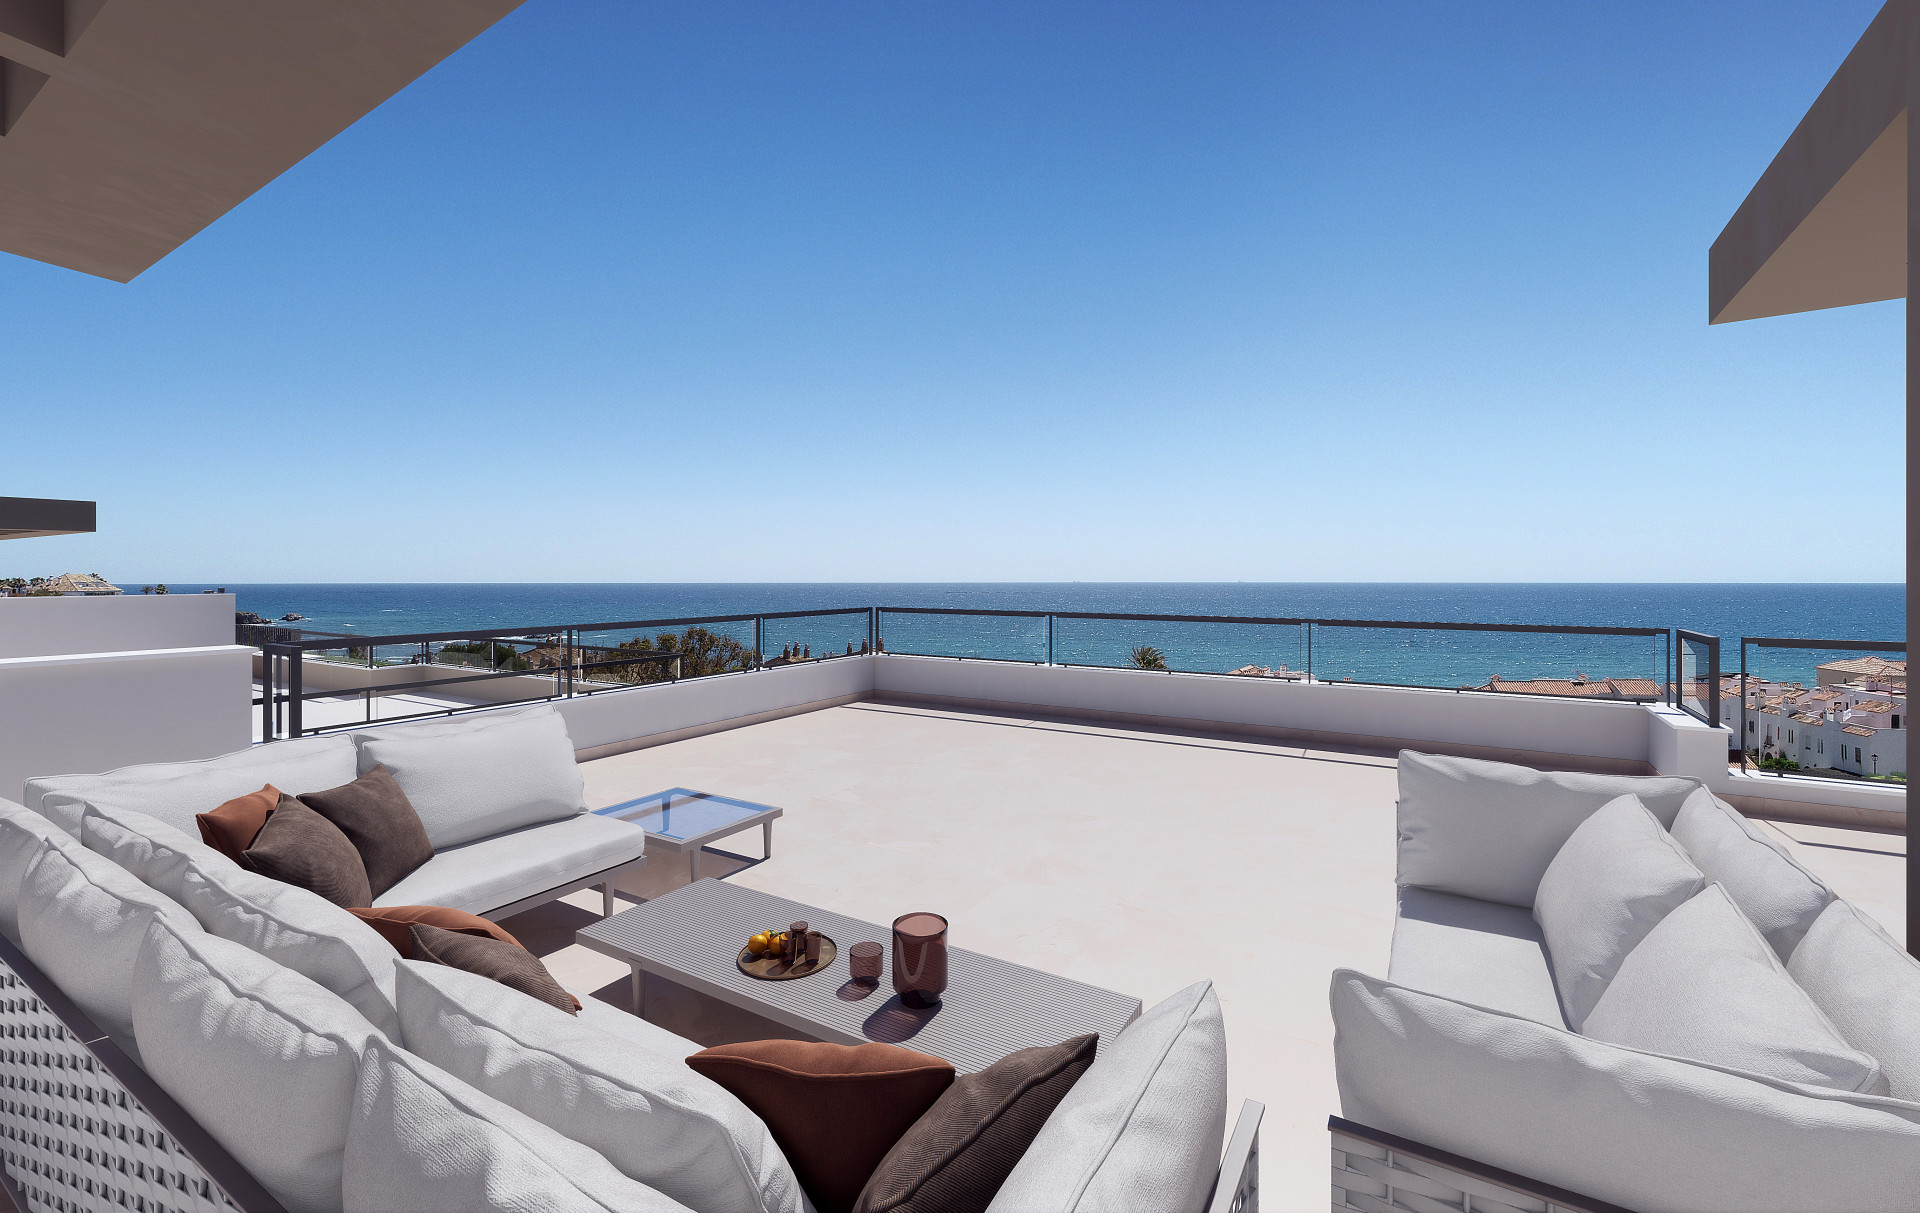 Ground floor flat with contemporary design garden and two bedrooms with sea views in Casares Playa. | Image 1